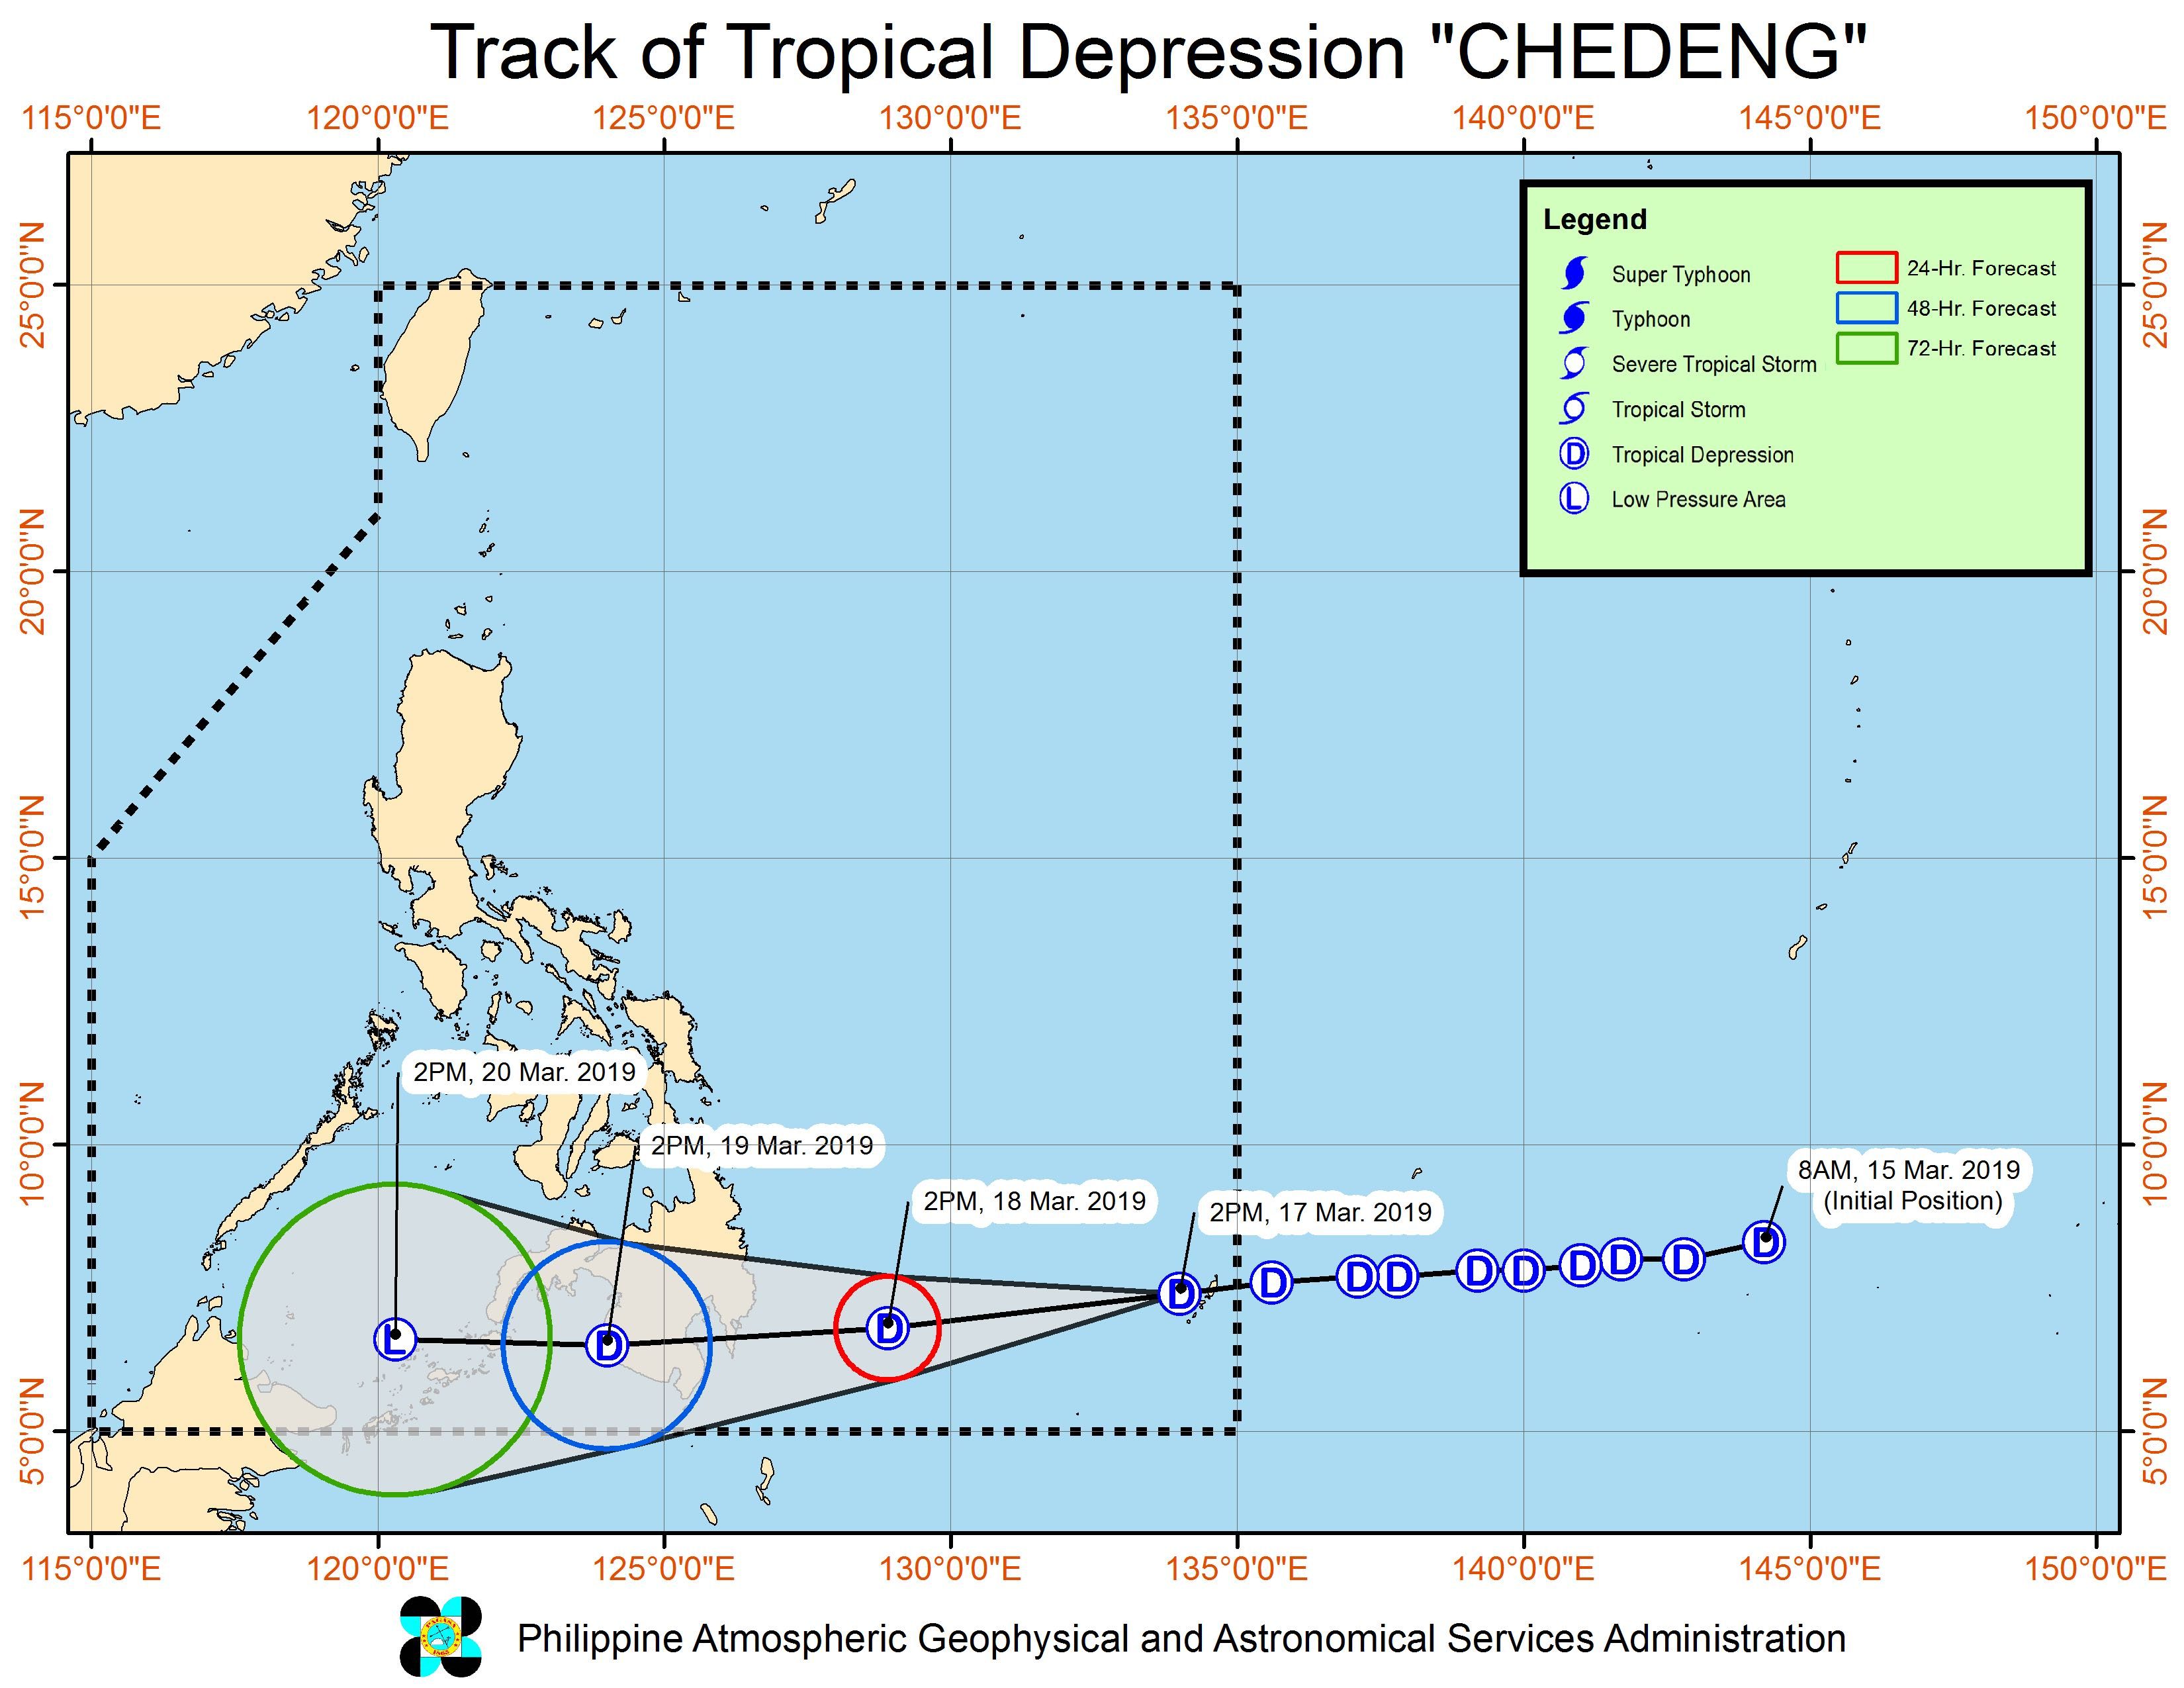 Forecast track of Tropical Depression Chedeng as of March 17, 2019, 5 pm. Image from PAGASA 